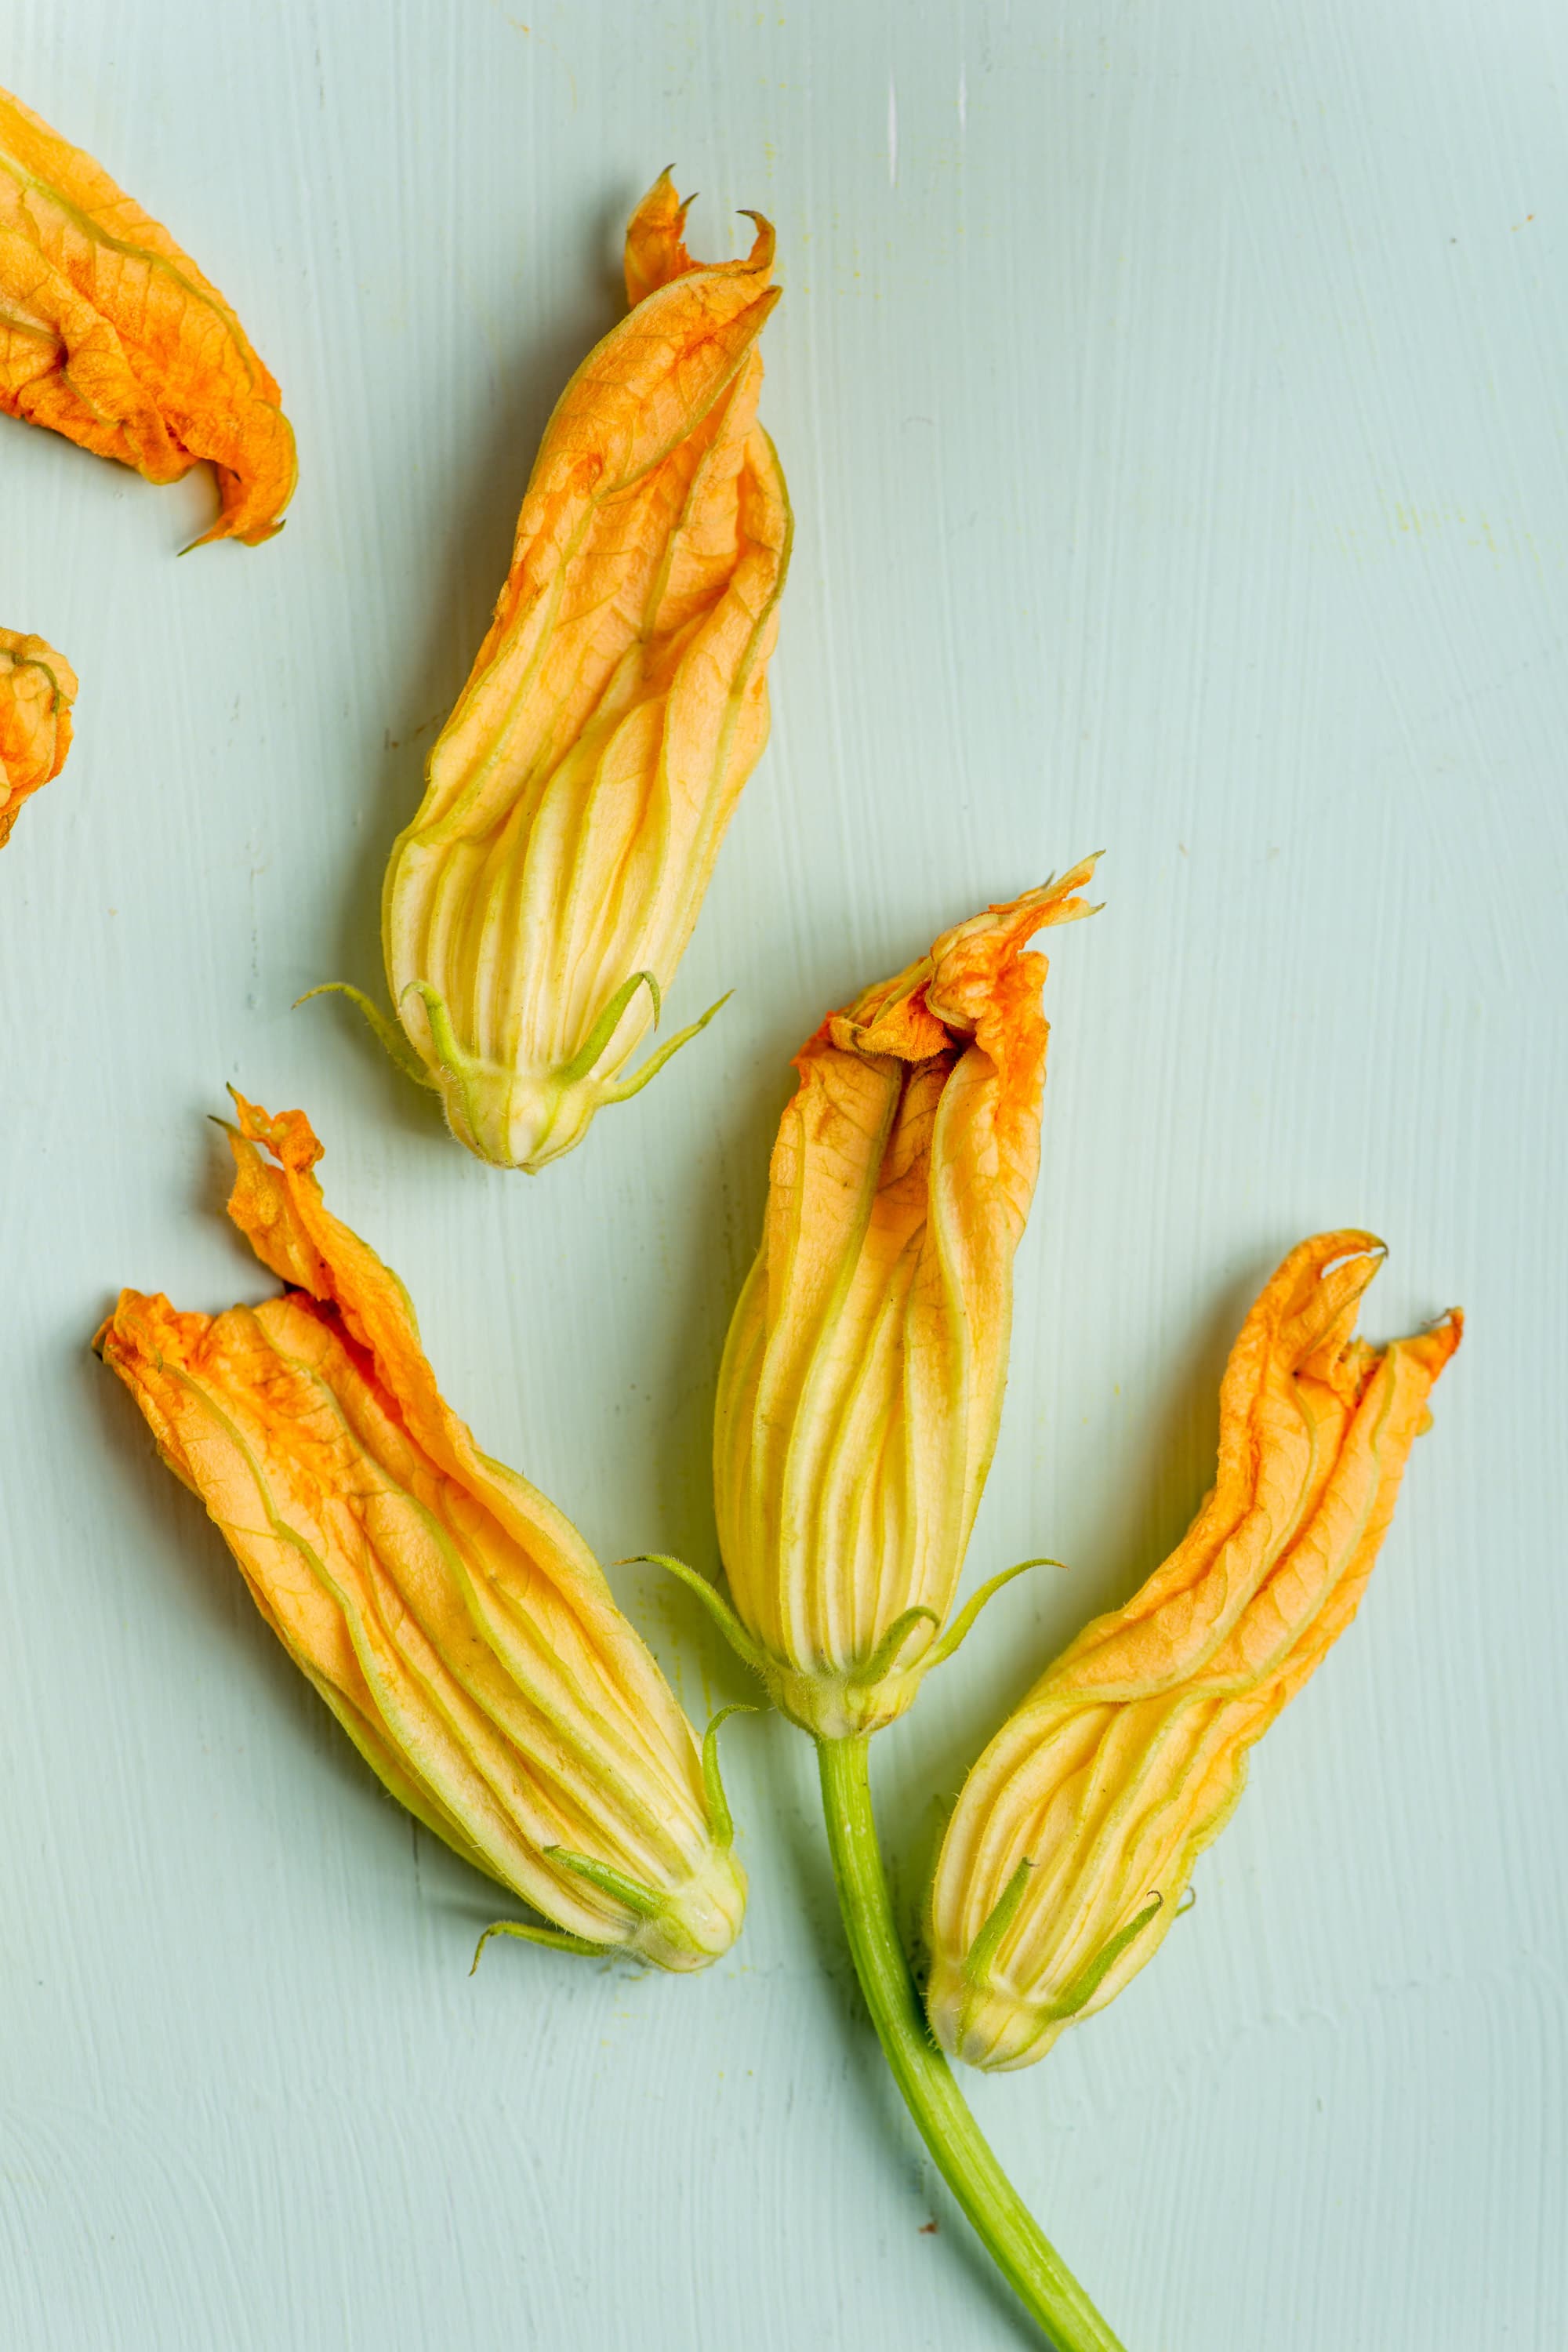 Zucchini Squash Blossoms on teal table top.